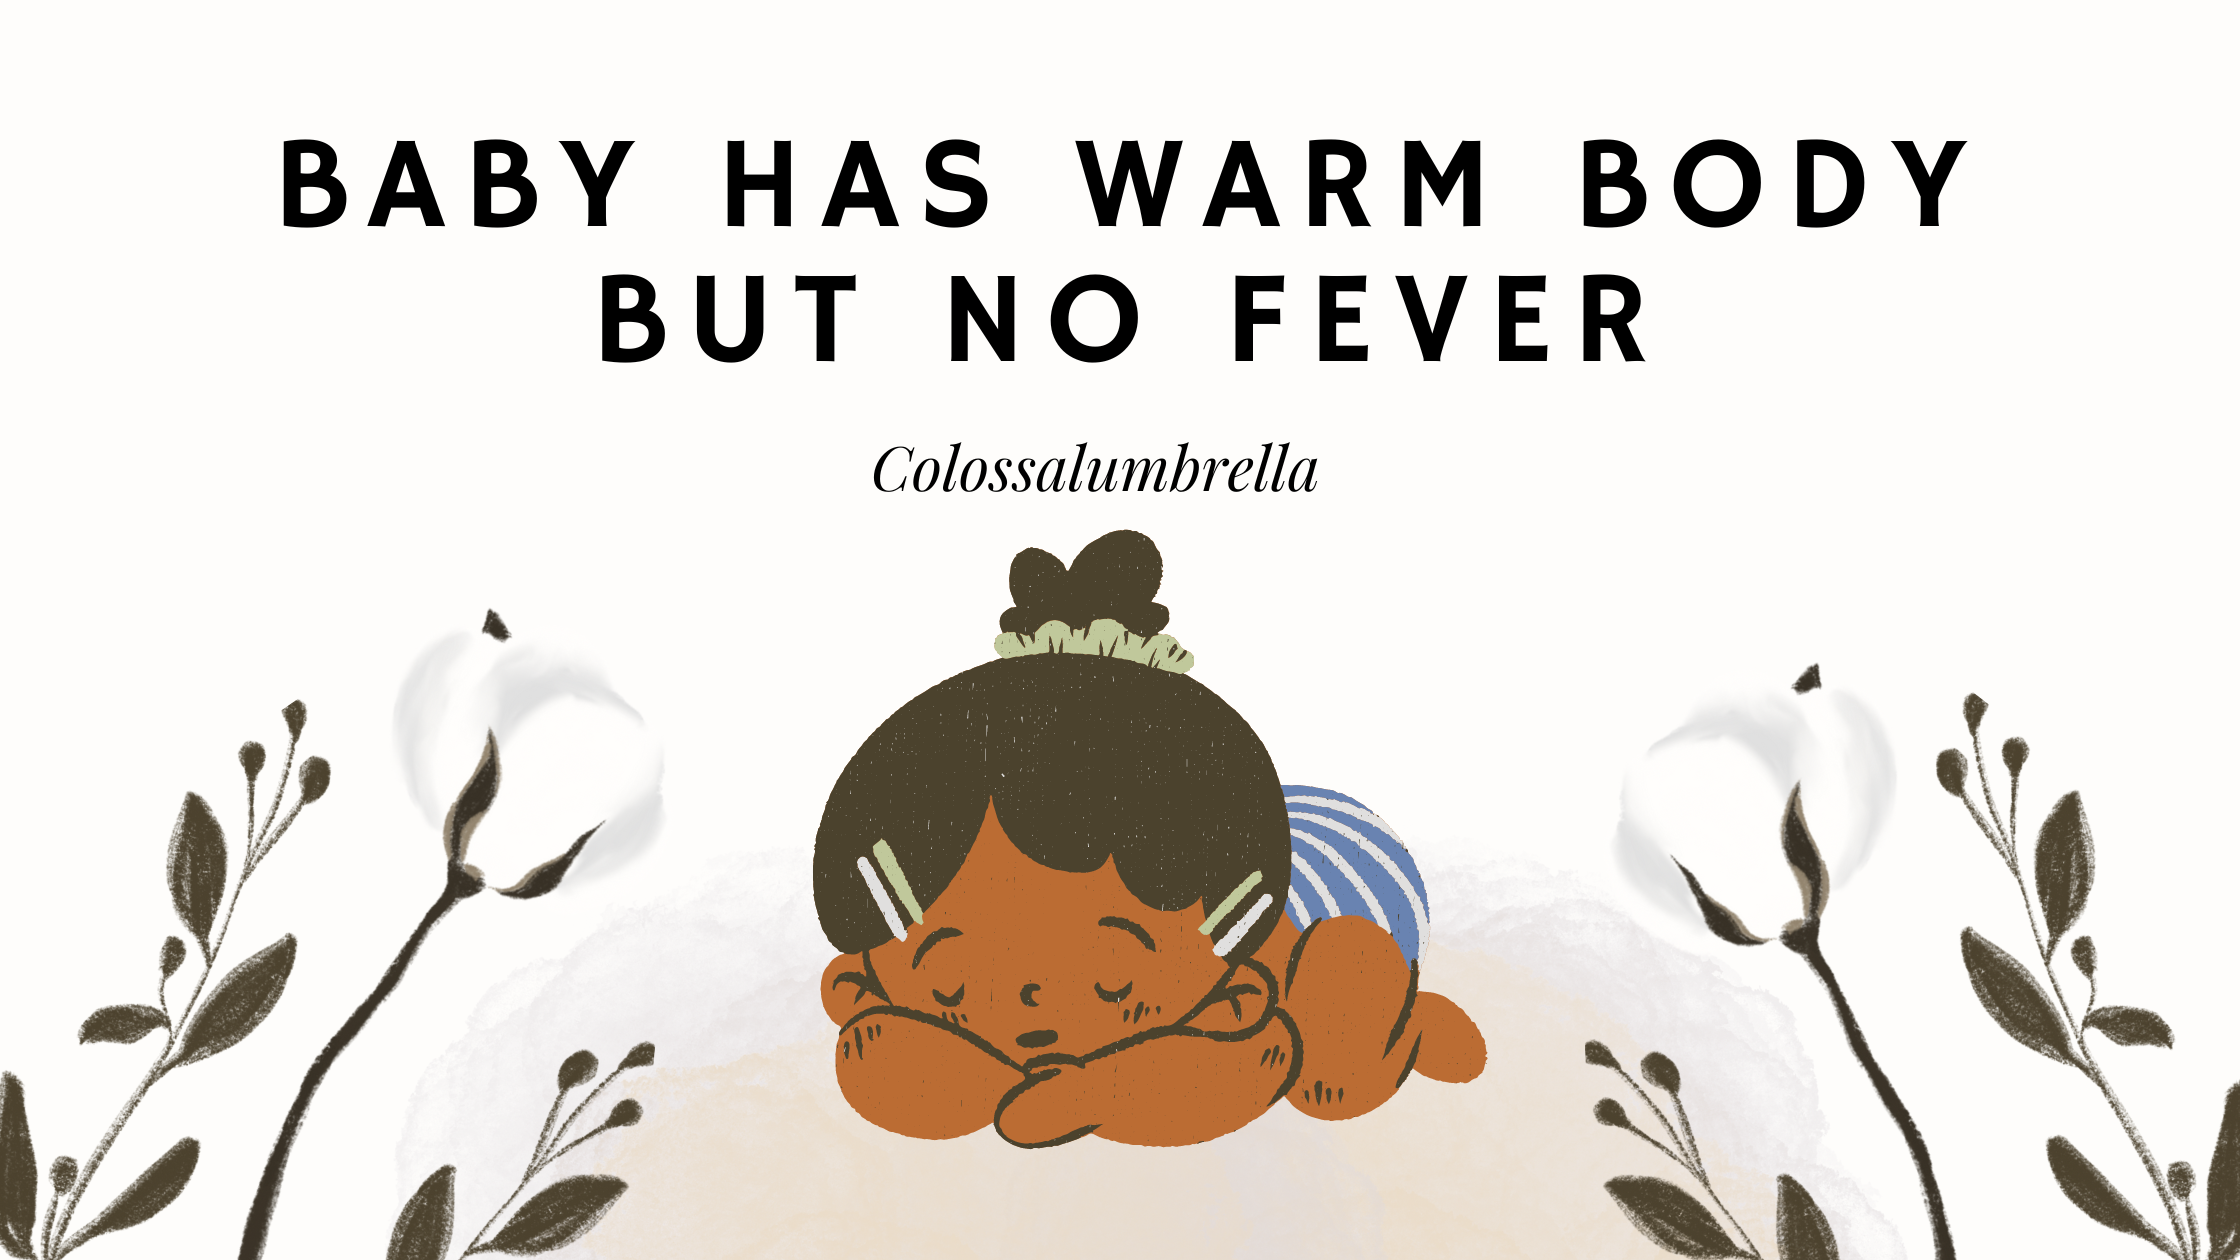 Baby feels warm but no fever by Colossalumbrella